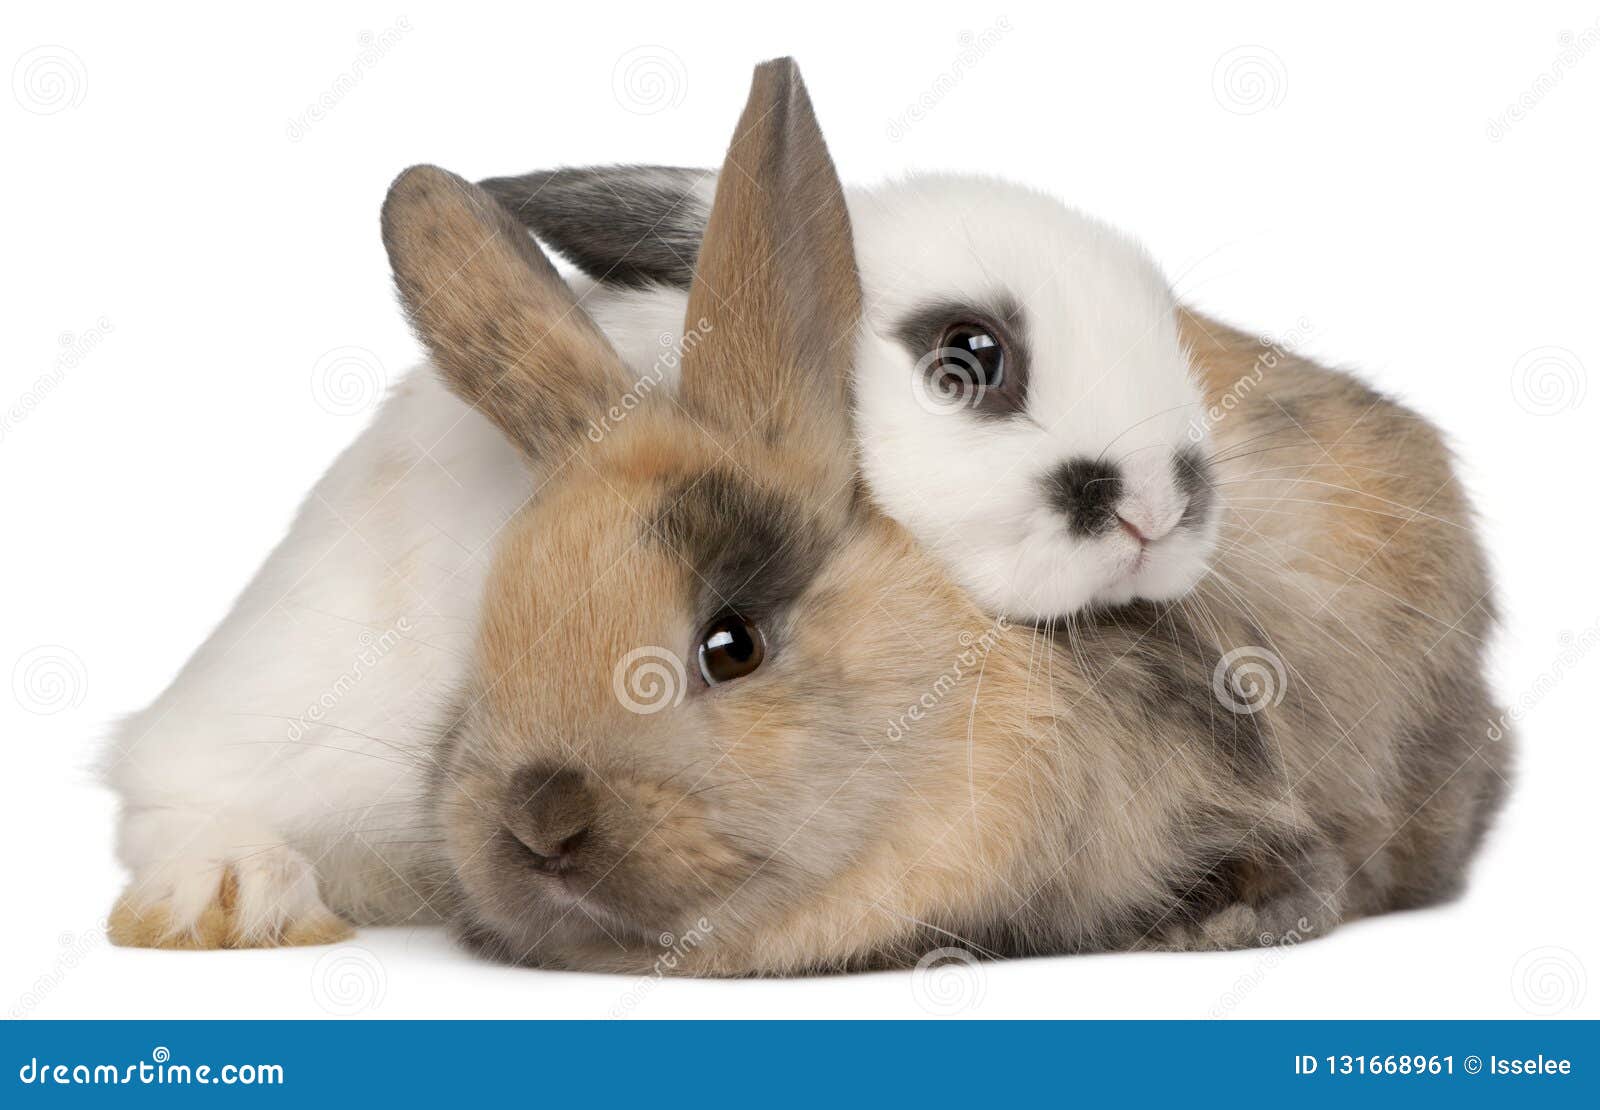 two rabbits in front of white background